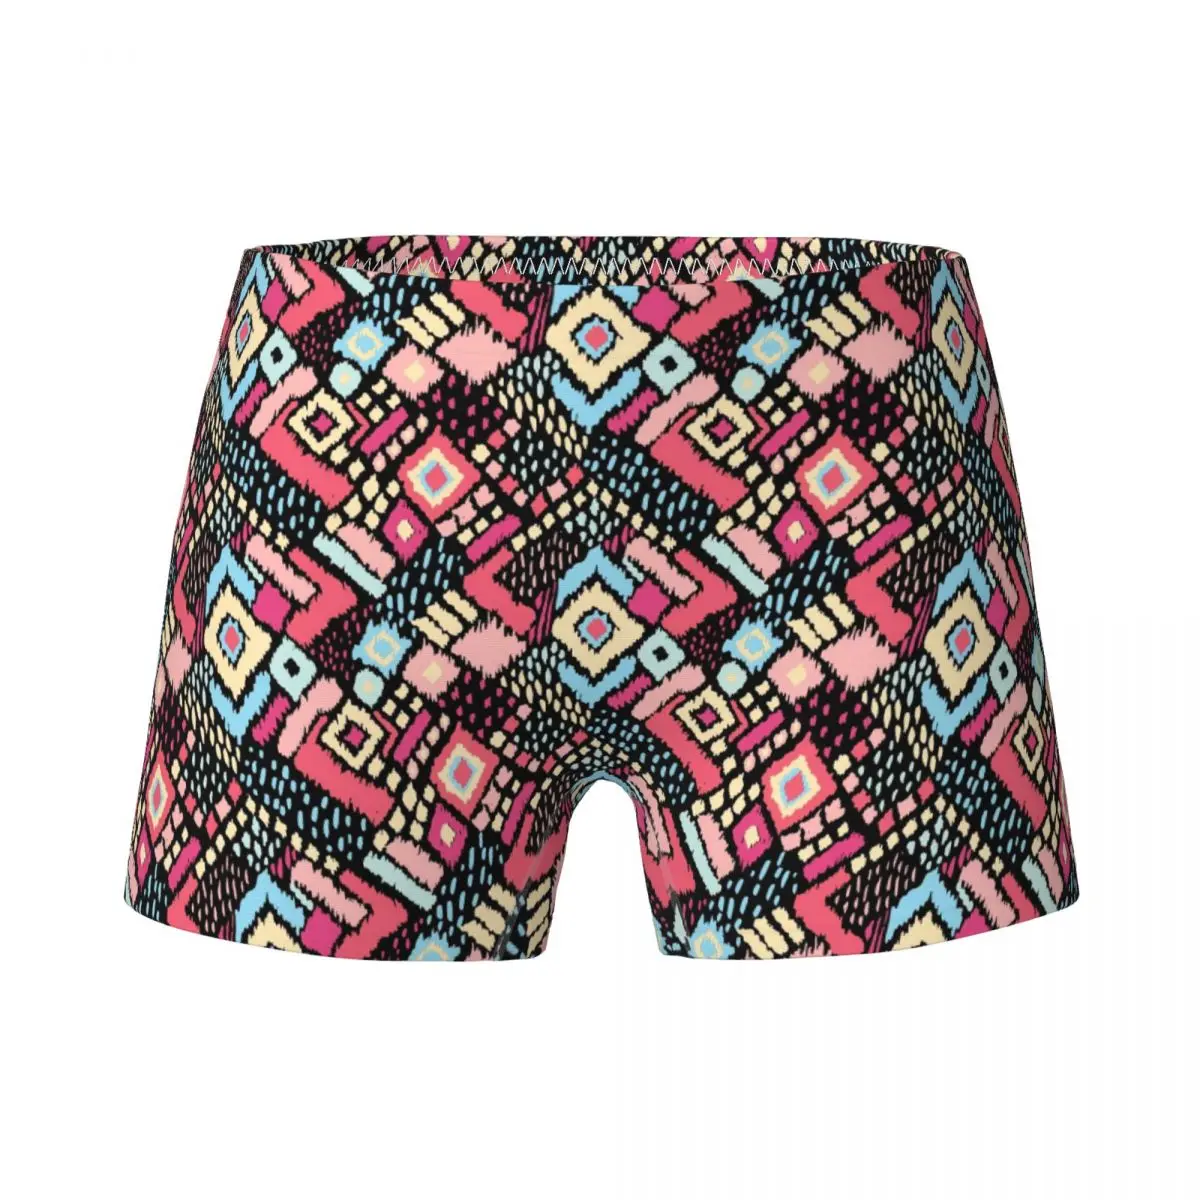 Youth Girls' Ikat Geometric Folklore Boxer Child Pure Cotton Underwear Teenage Aztec Style Underpants Briefs 4-15Y